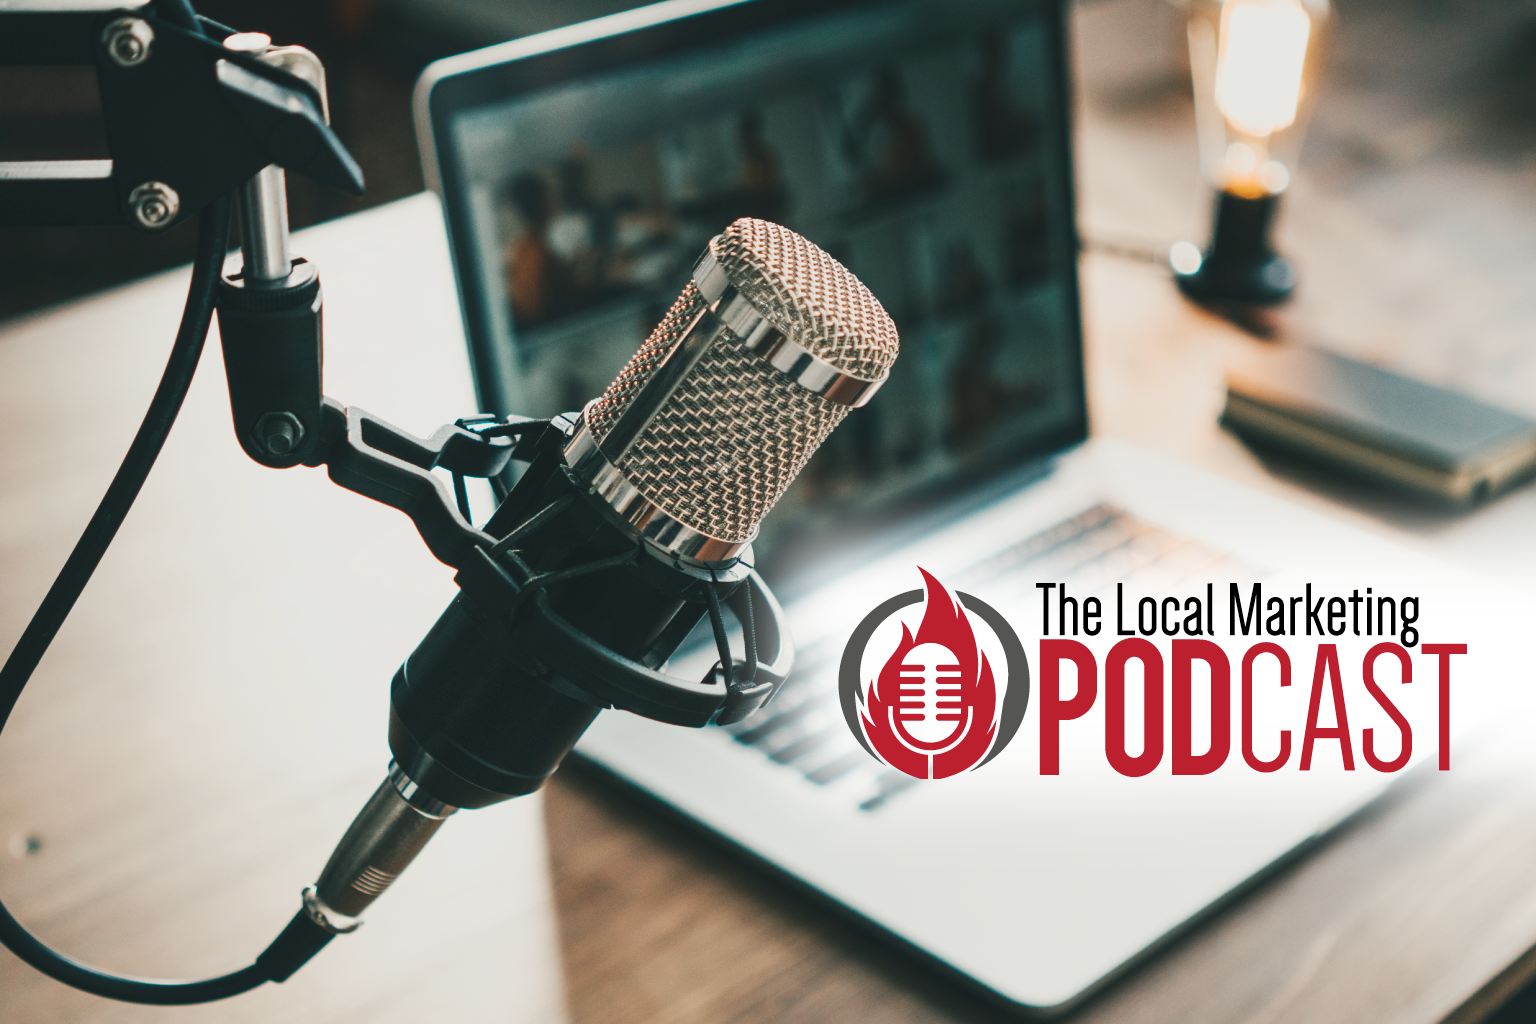 Supply Chain Issues, Google Analytics, Holiday Marketing, and NFTs—Oh, My!  The Local Marketing Podcast—Episode 02